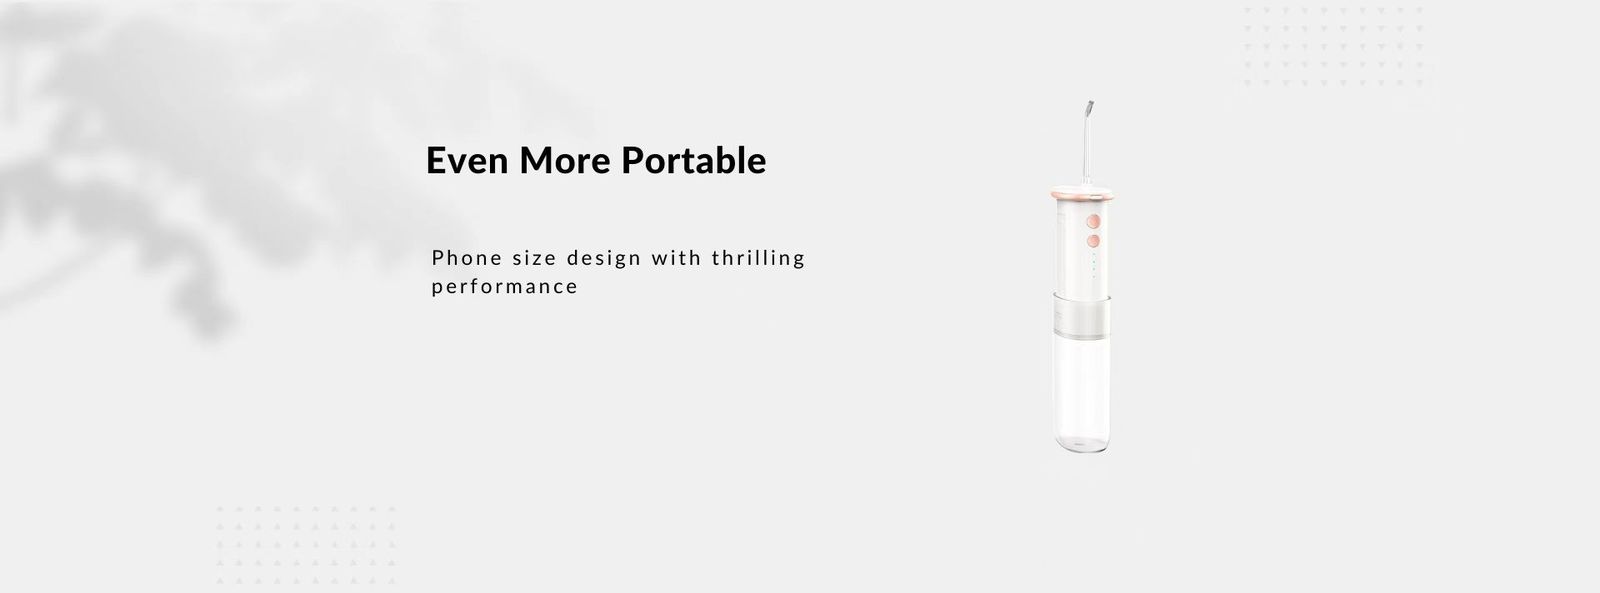 quality Portable Water Flosser factory